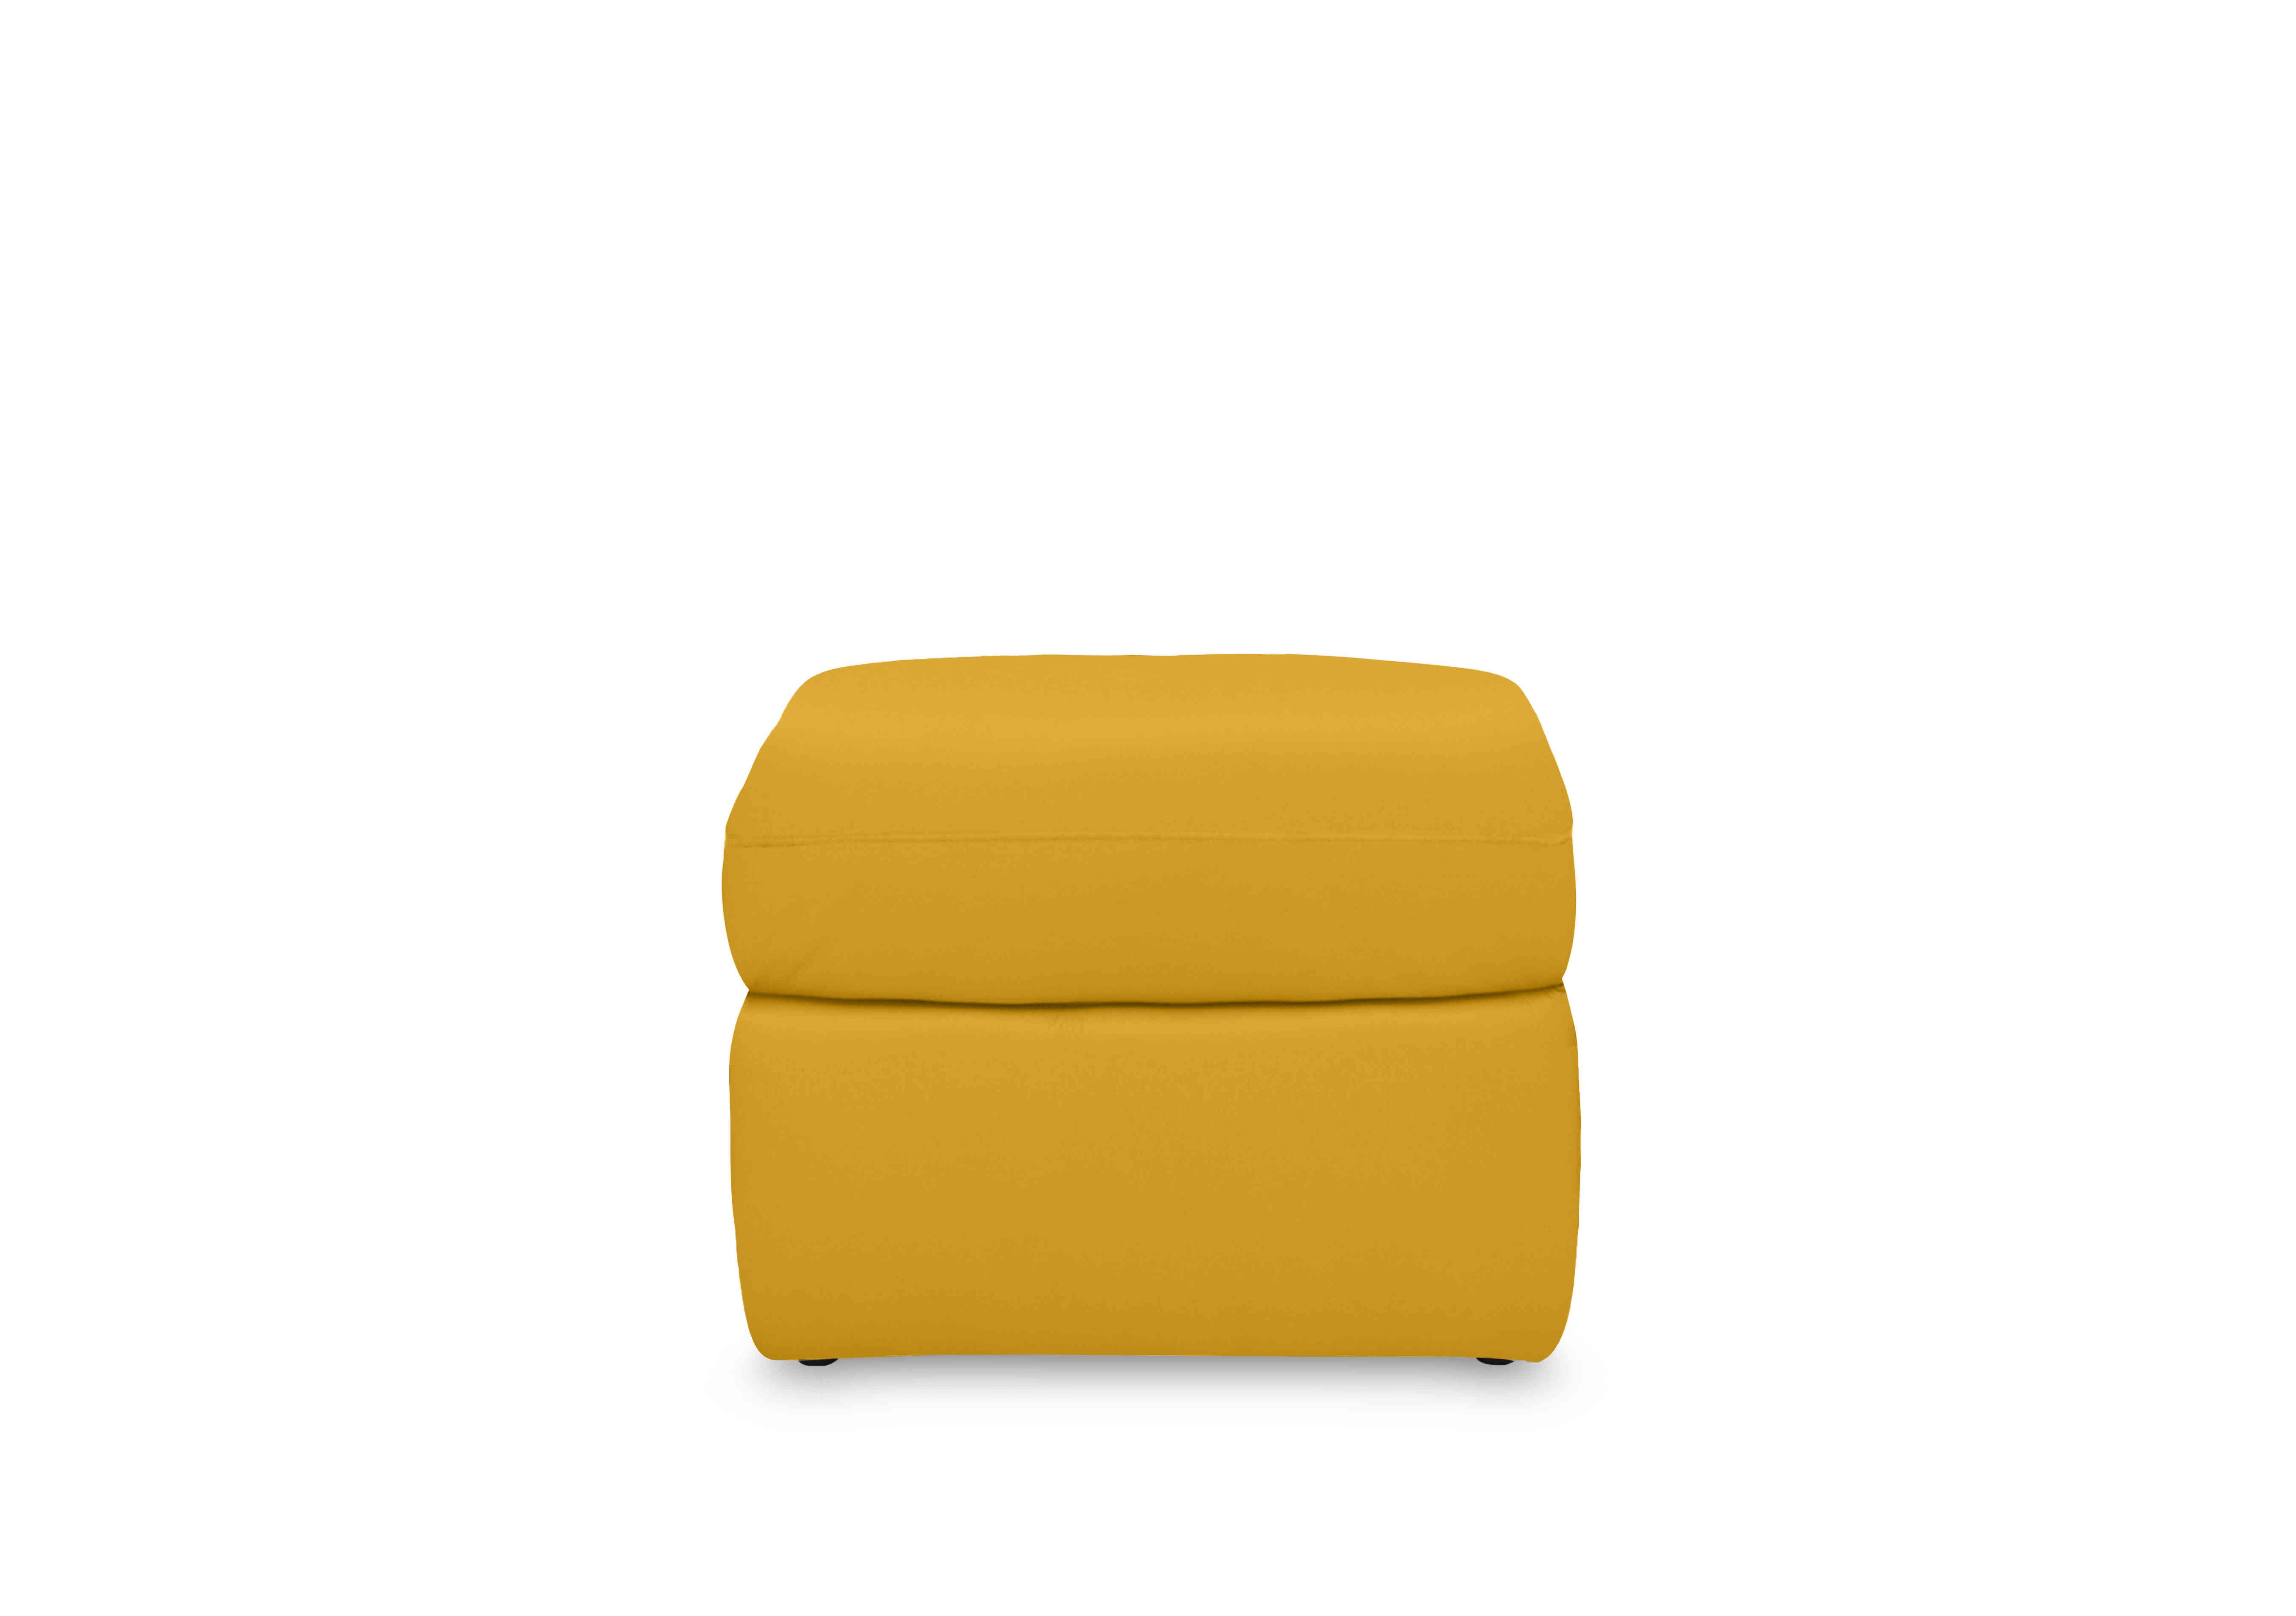 Cinemax Leather Storage Footstool in Le-9310 Giallo on Furniture Village